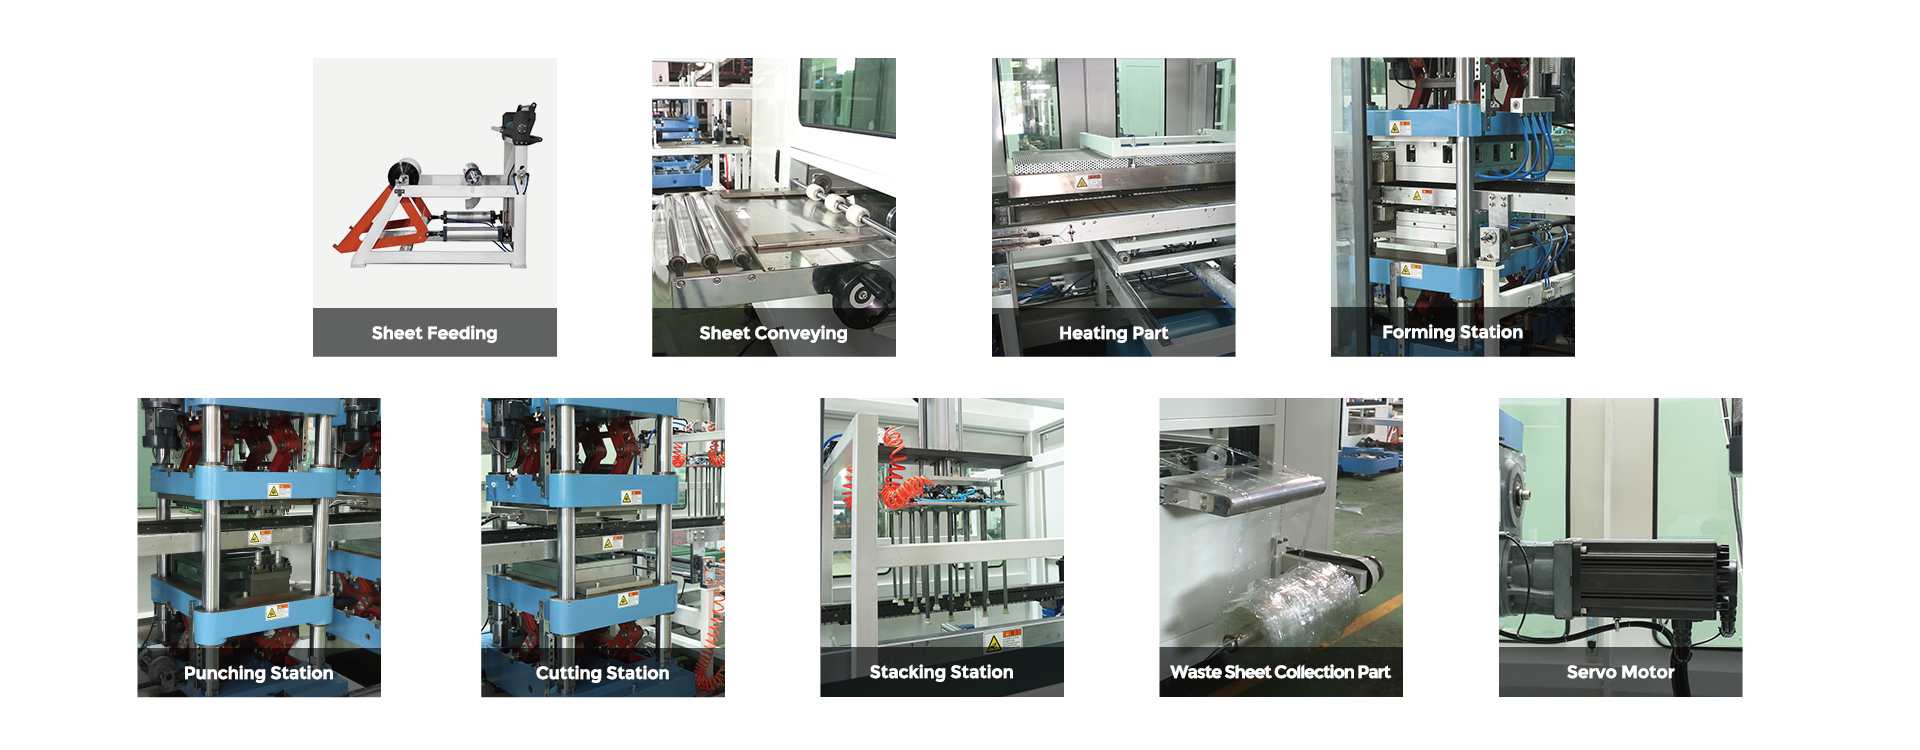 Multi-station automatic plastic thermoforming machine workflow